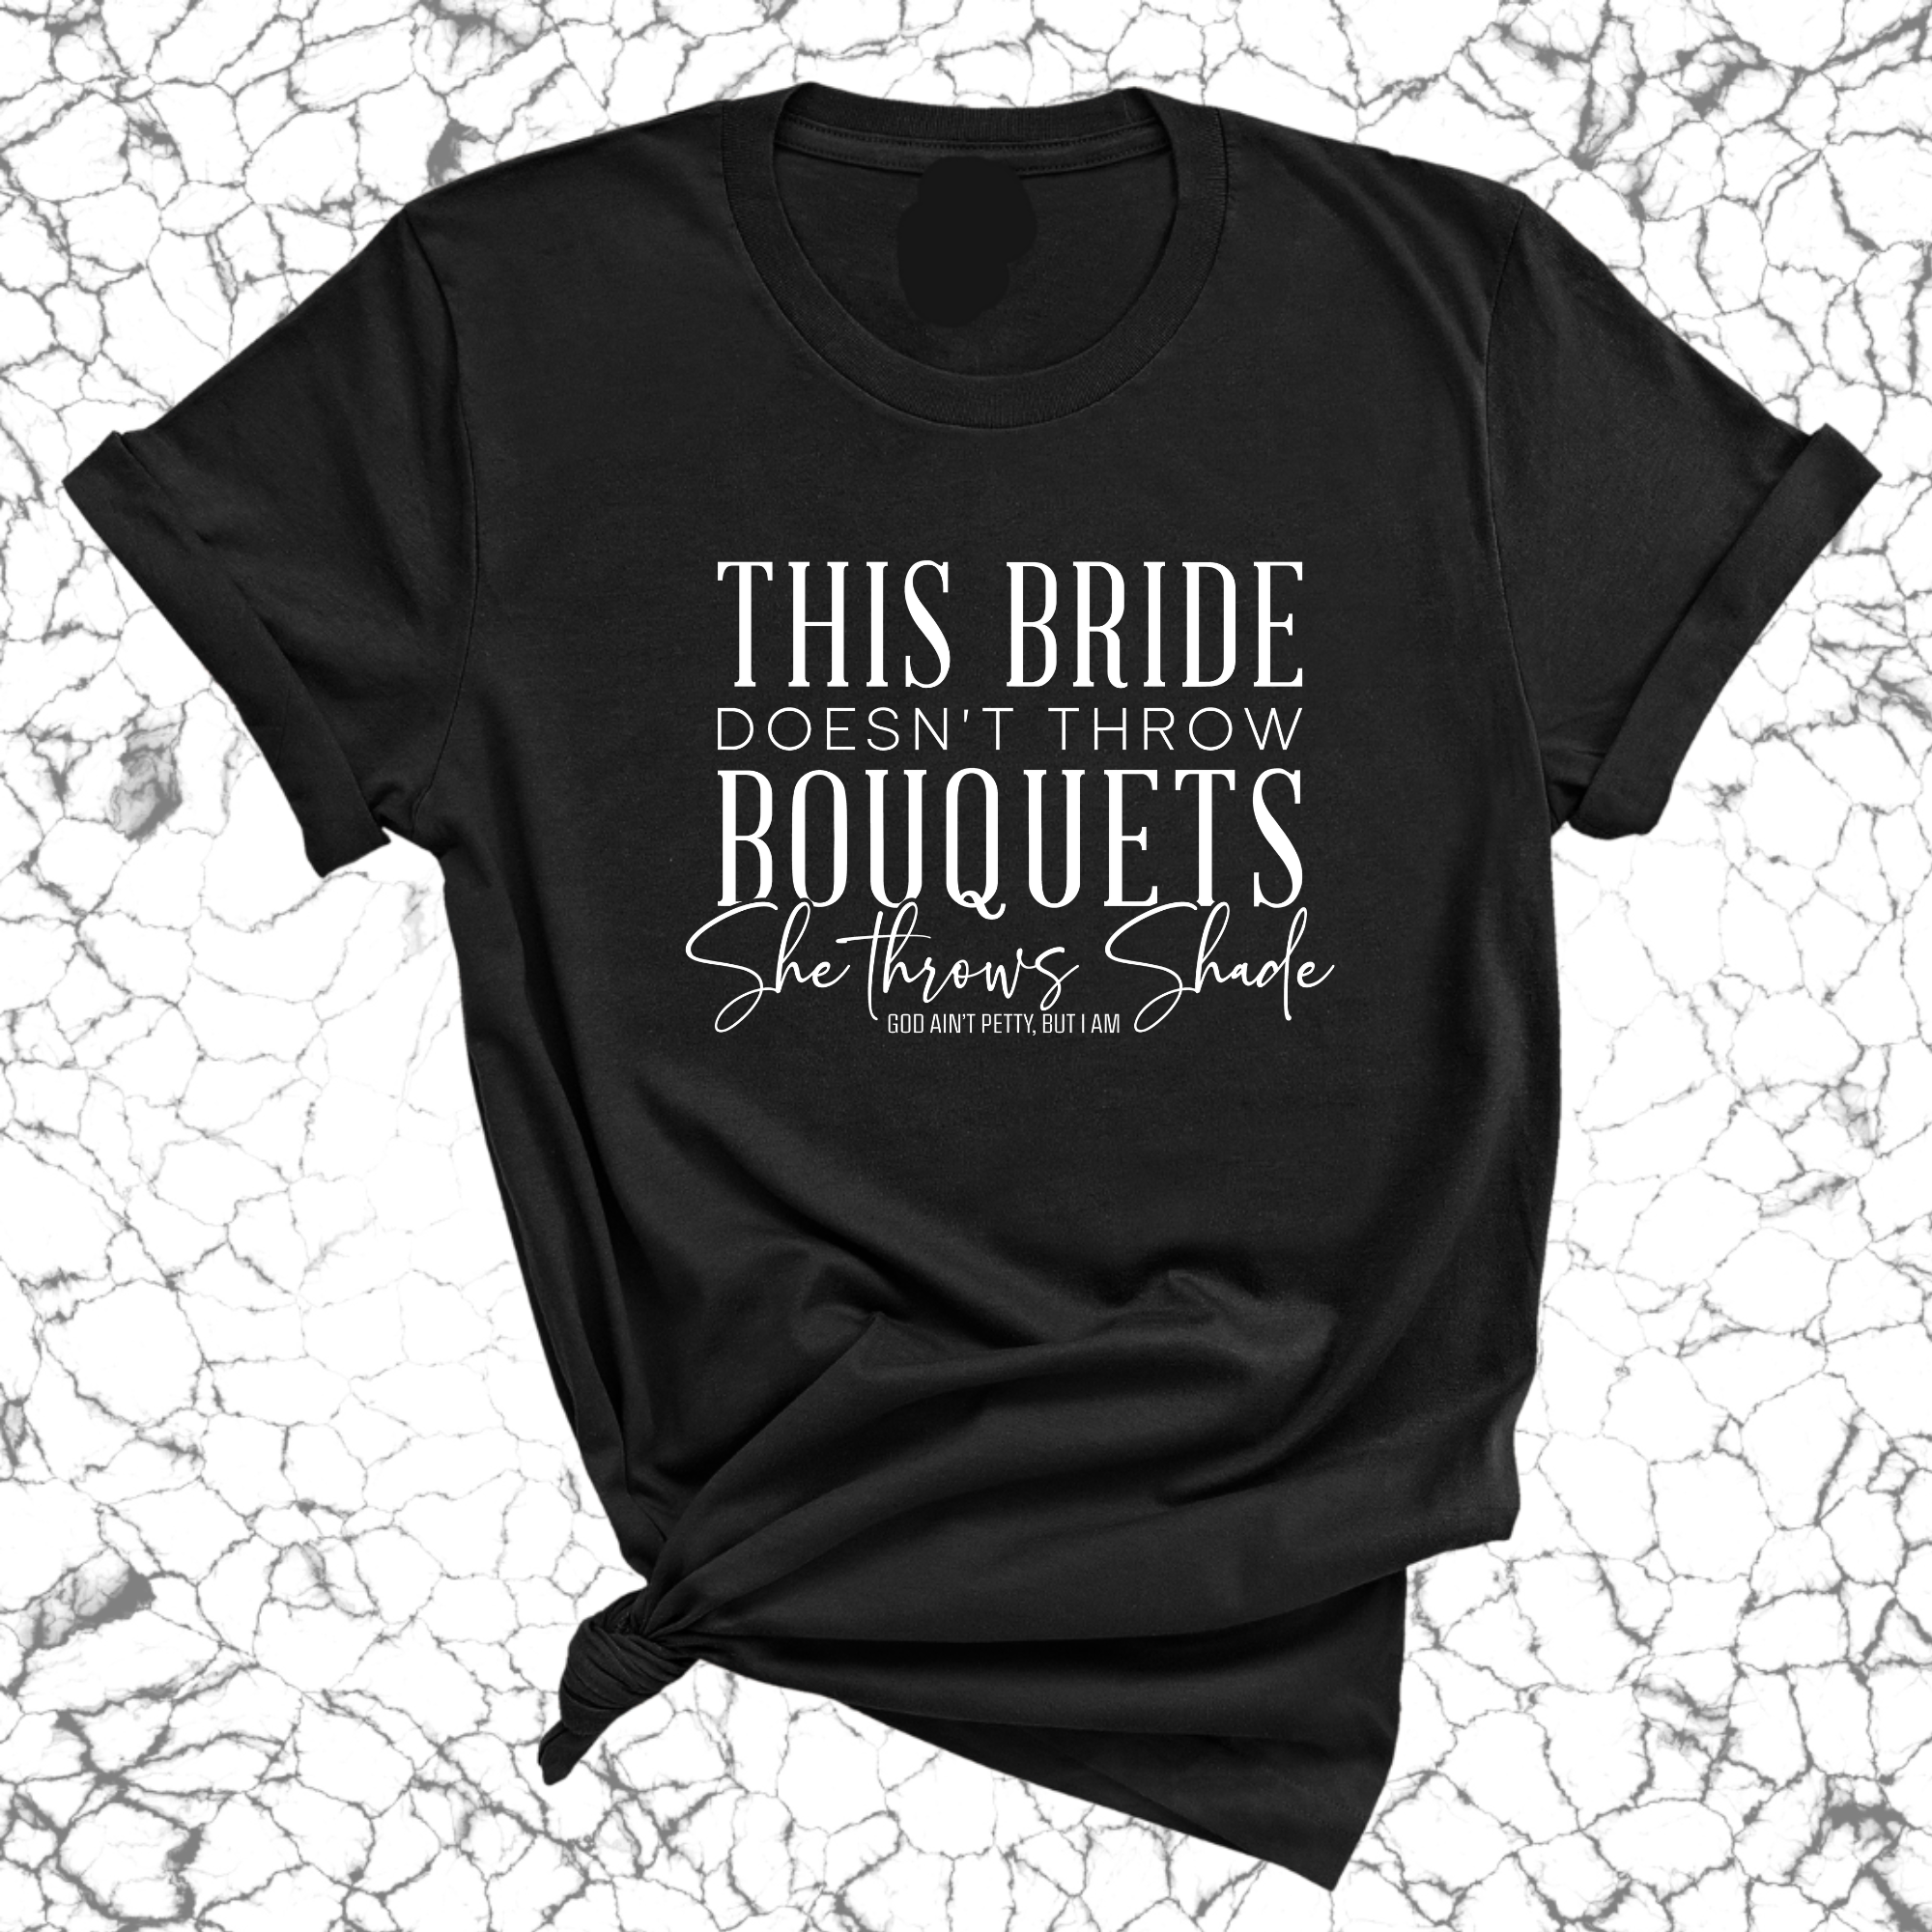 This bride doesn't throw bouquets, she throws shades Unisex Tee-T-Shirt-The Original God Ain't Petty But I Am